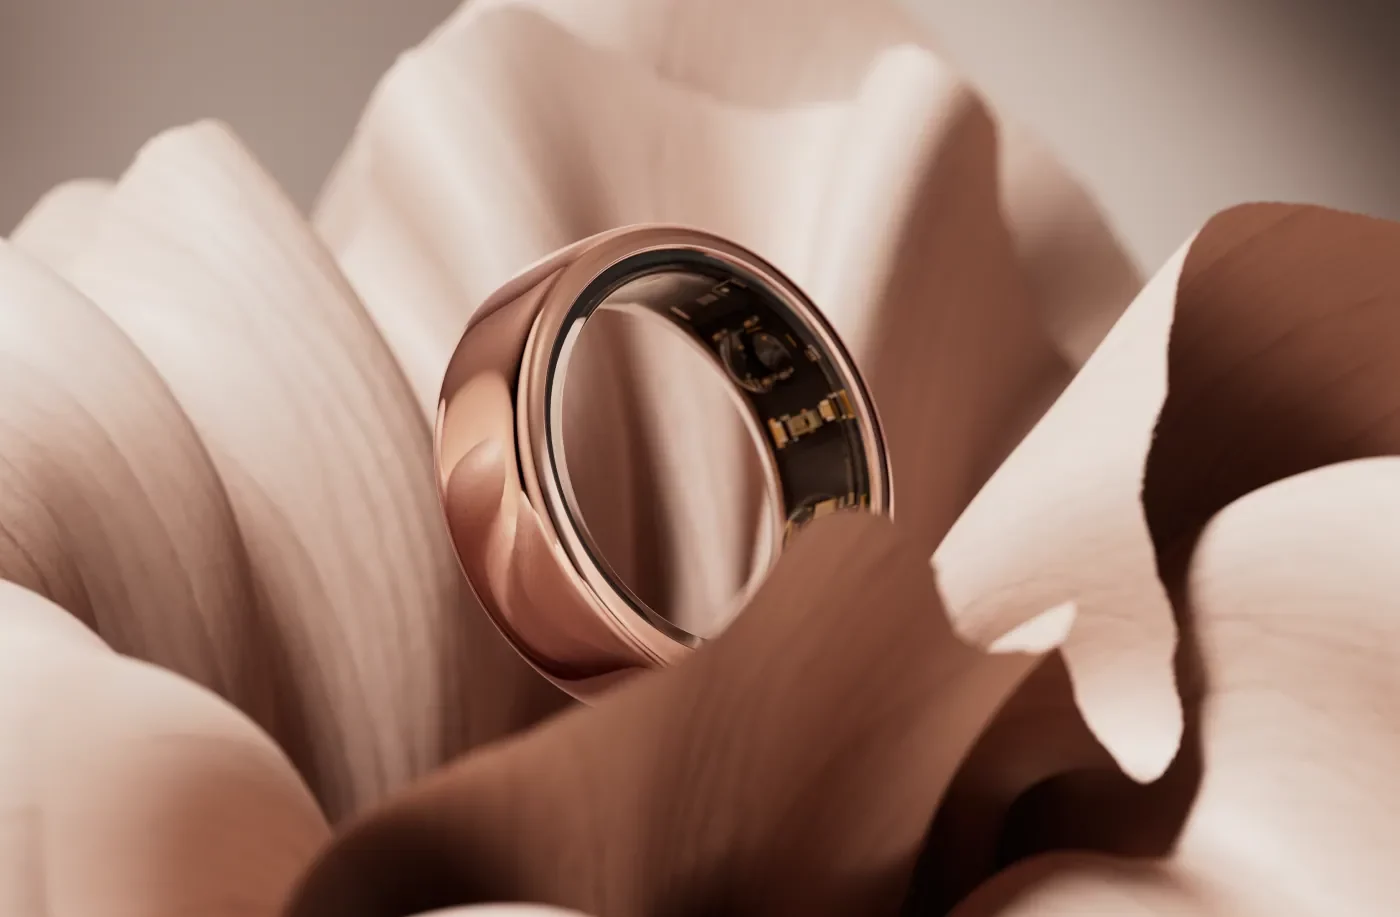 How To Get A Free Oura Ring? Grab Your Smart Ring Now!